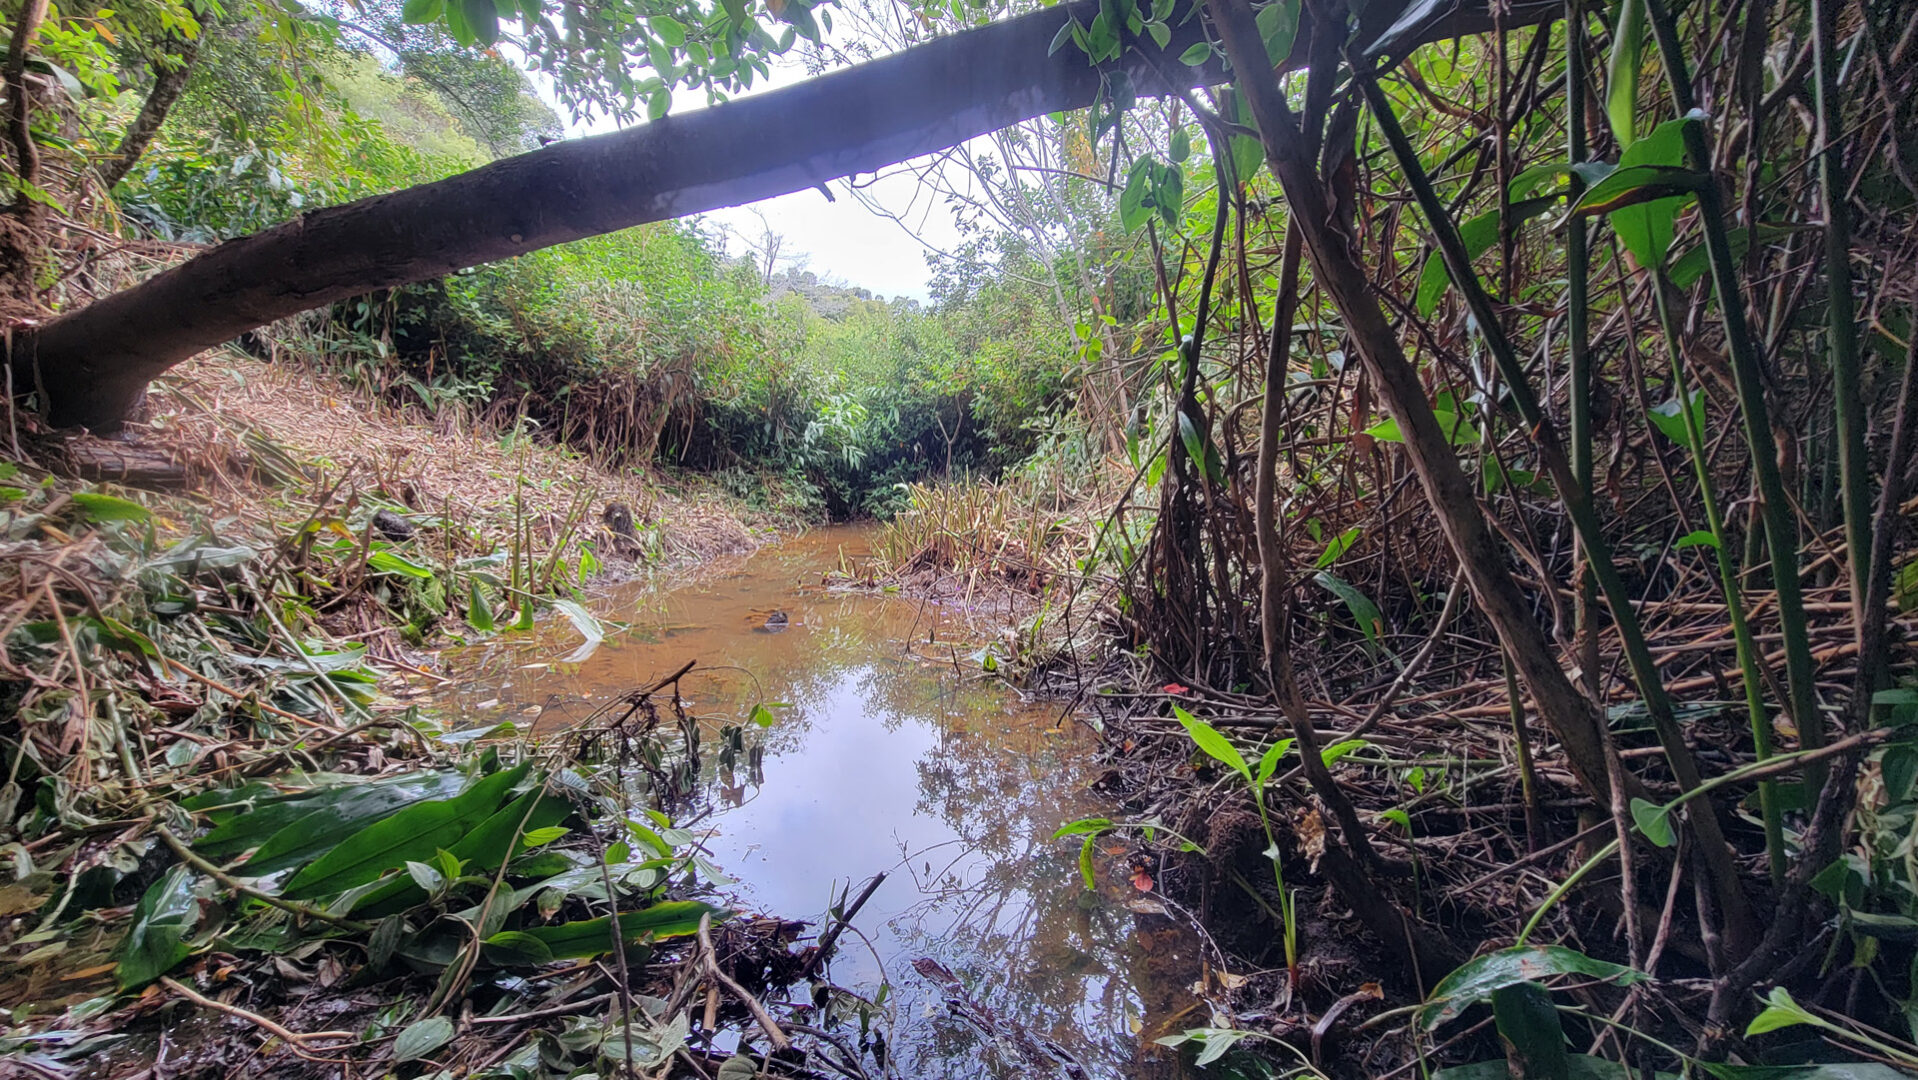 View showing approximately 20 feet of cleared stream